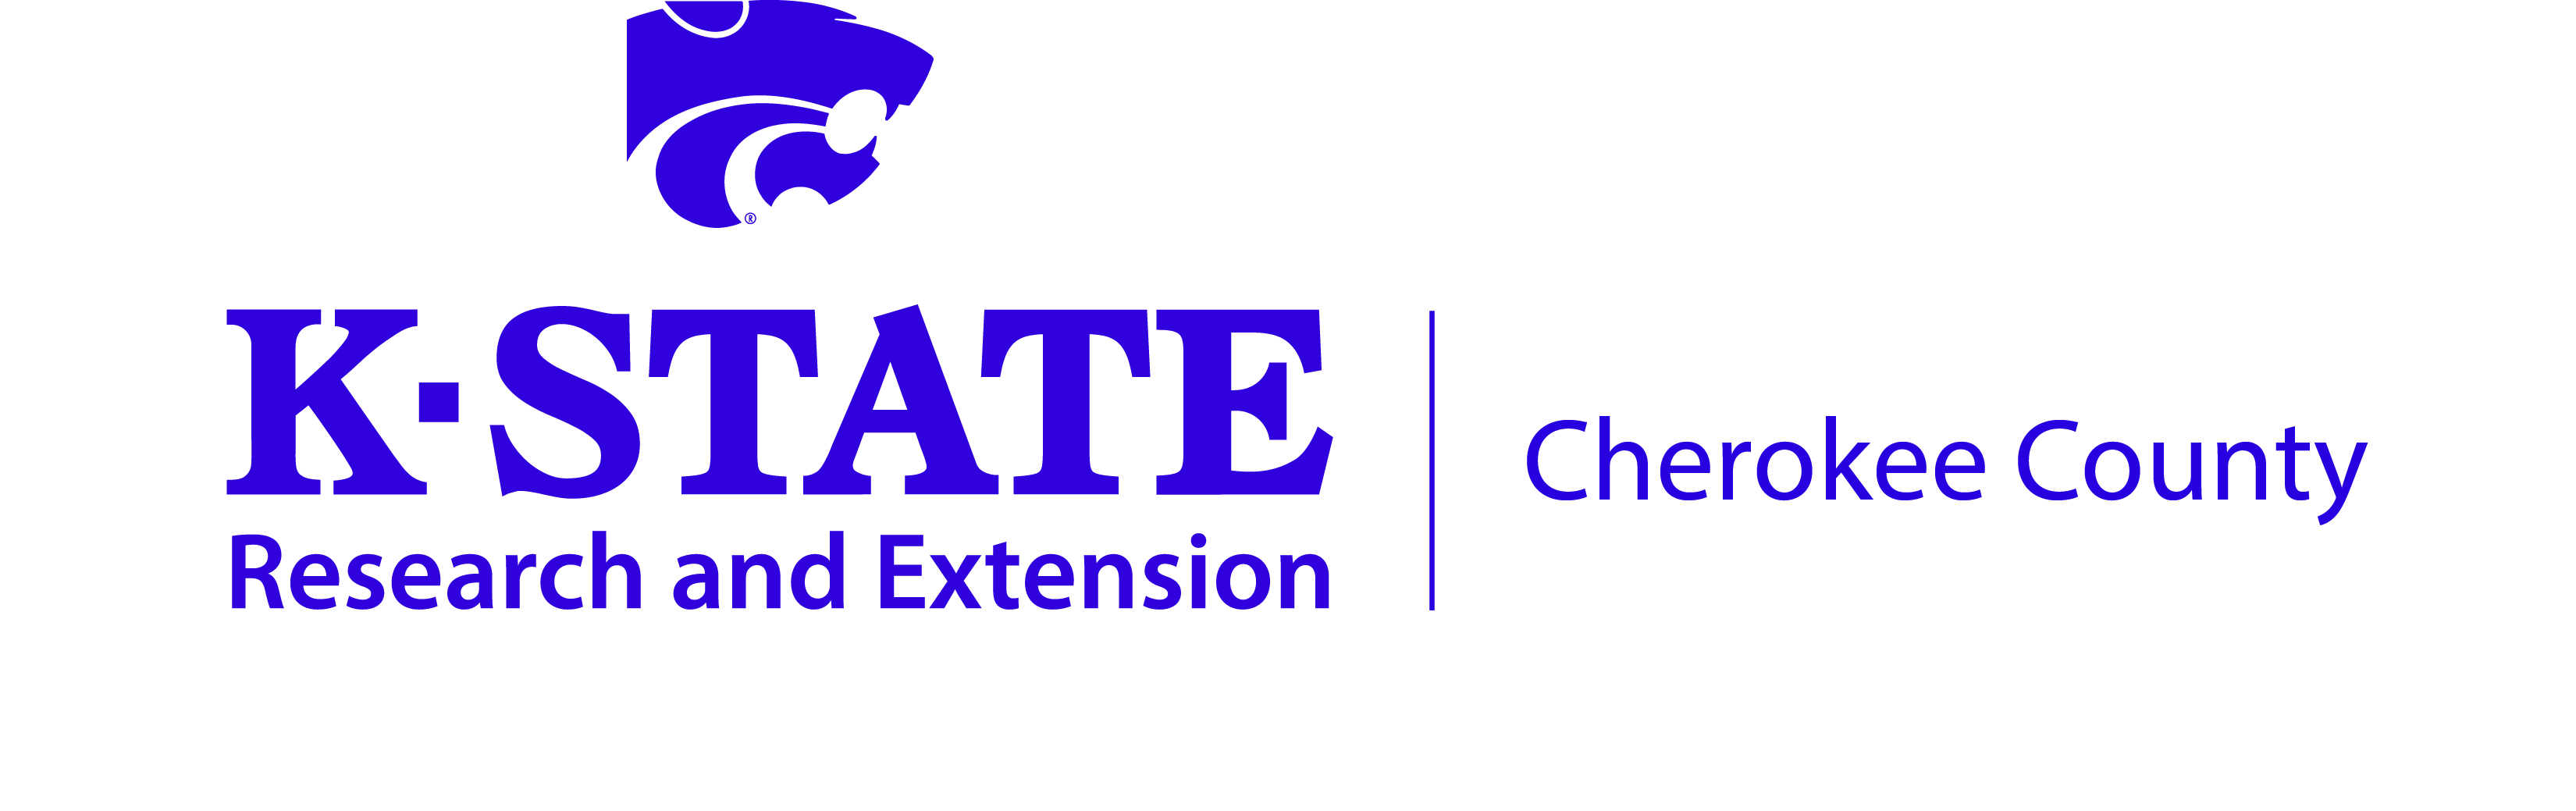 Cherokee County K-State Research and Extension